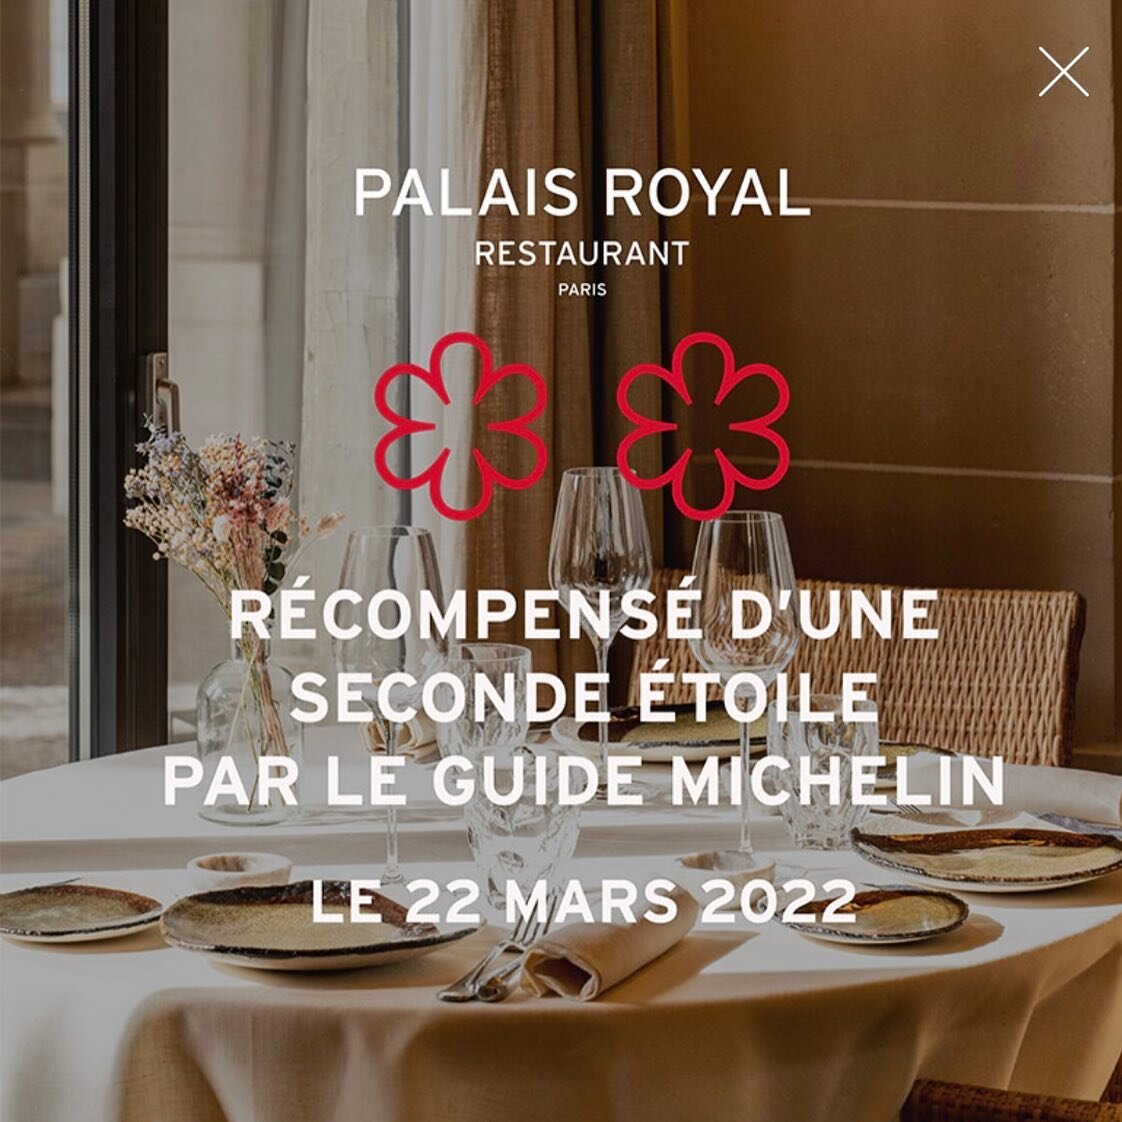 Did you know Evok Collection also comprises a hidden gem of a restaurant? 
Introducing Le Restaurant du Palais Royal, awarded a second Michelin Star today. 
I was lucky enough to have met Chef Philip Chronopoulos and Ahmad Houmani, the man orchestrat